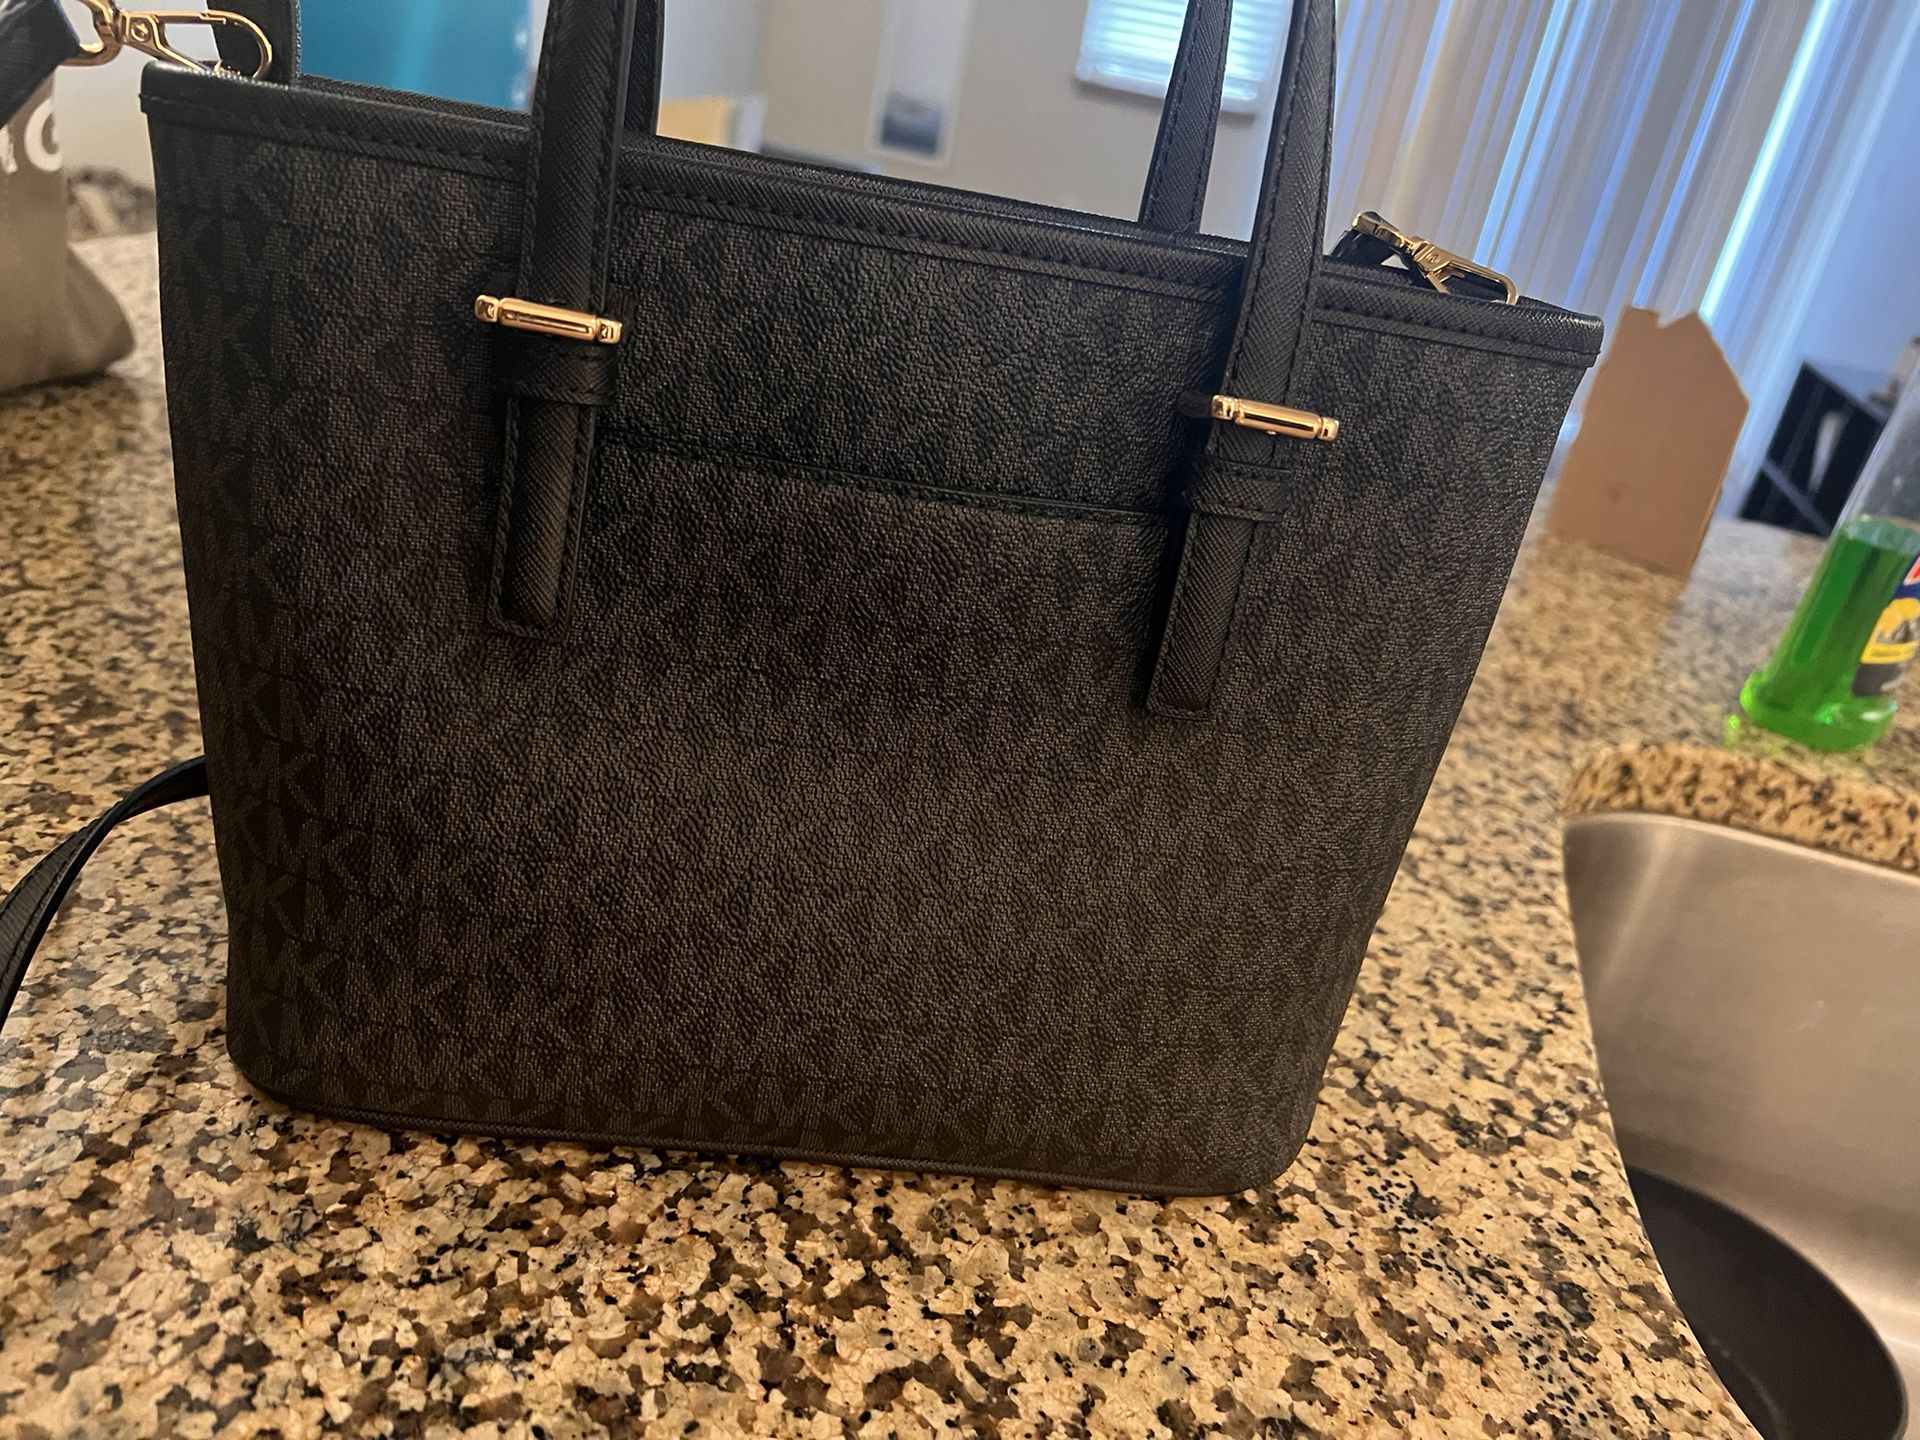 MK Purse And Marc Jacobs Tote Bag